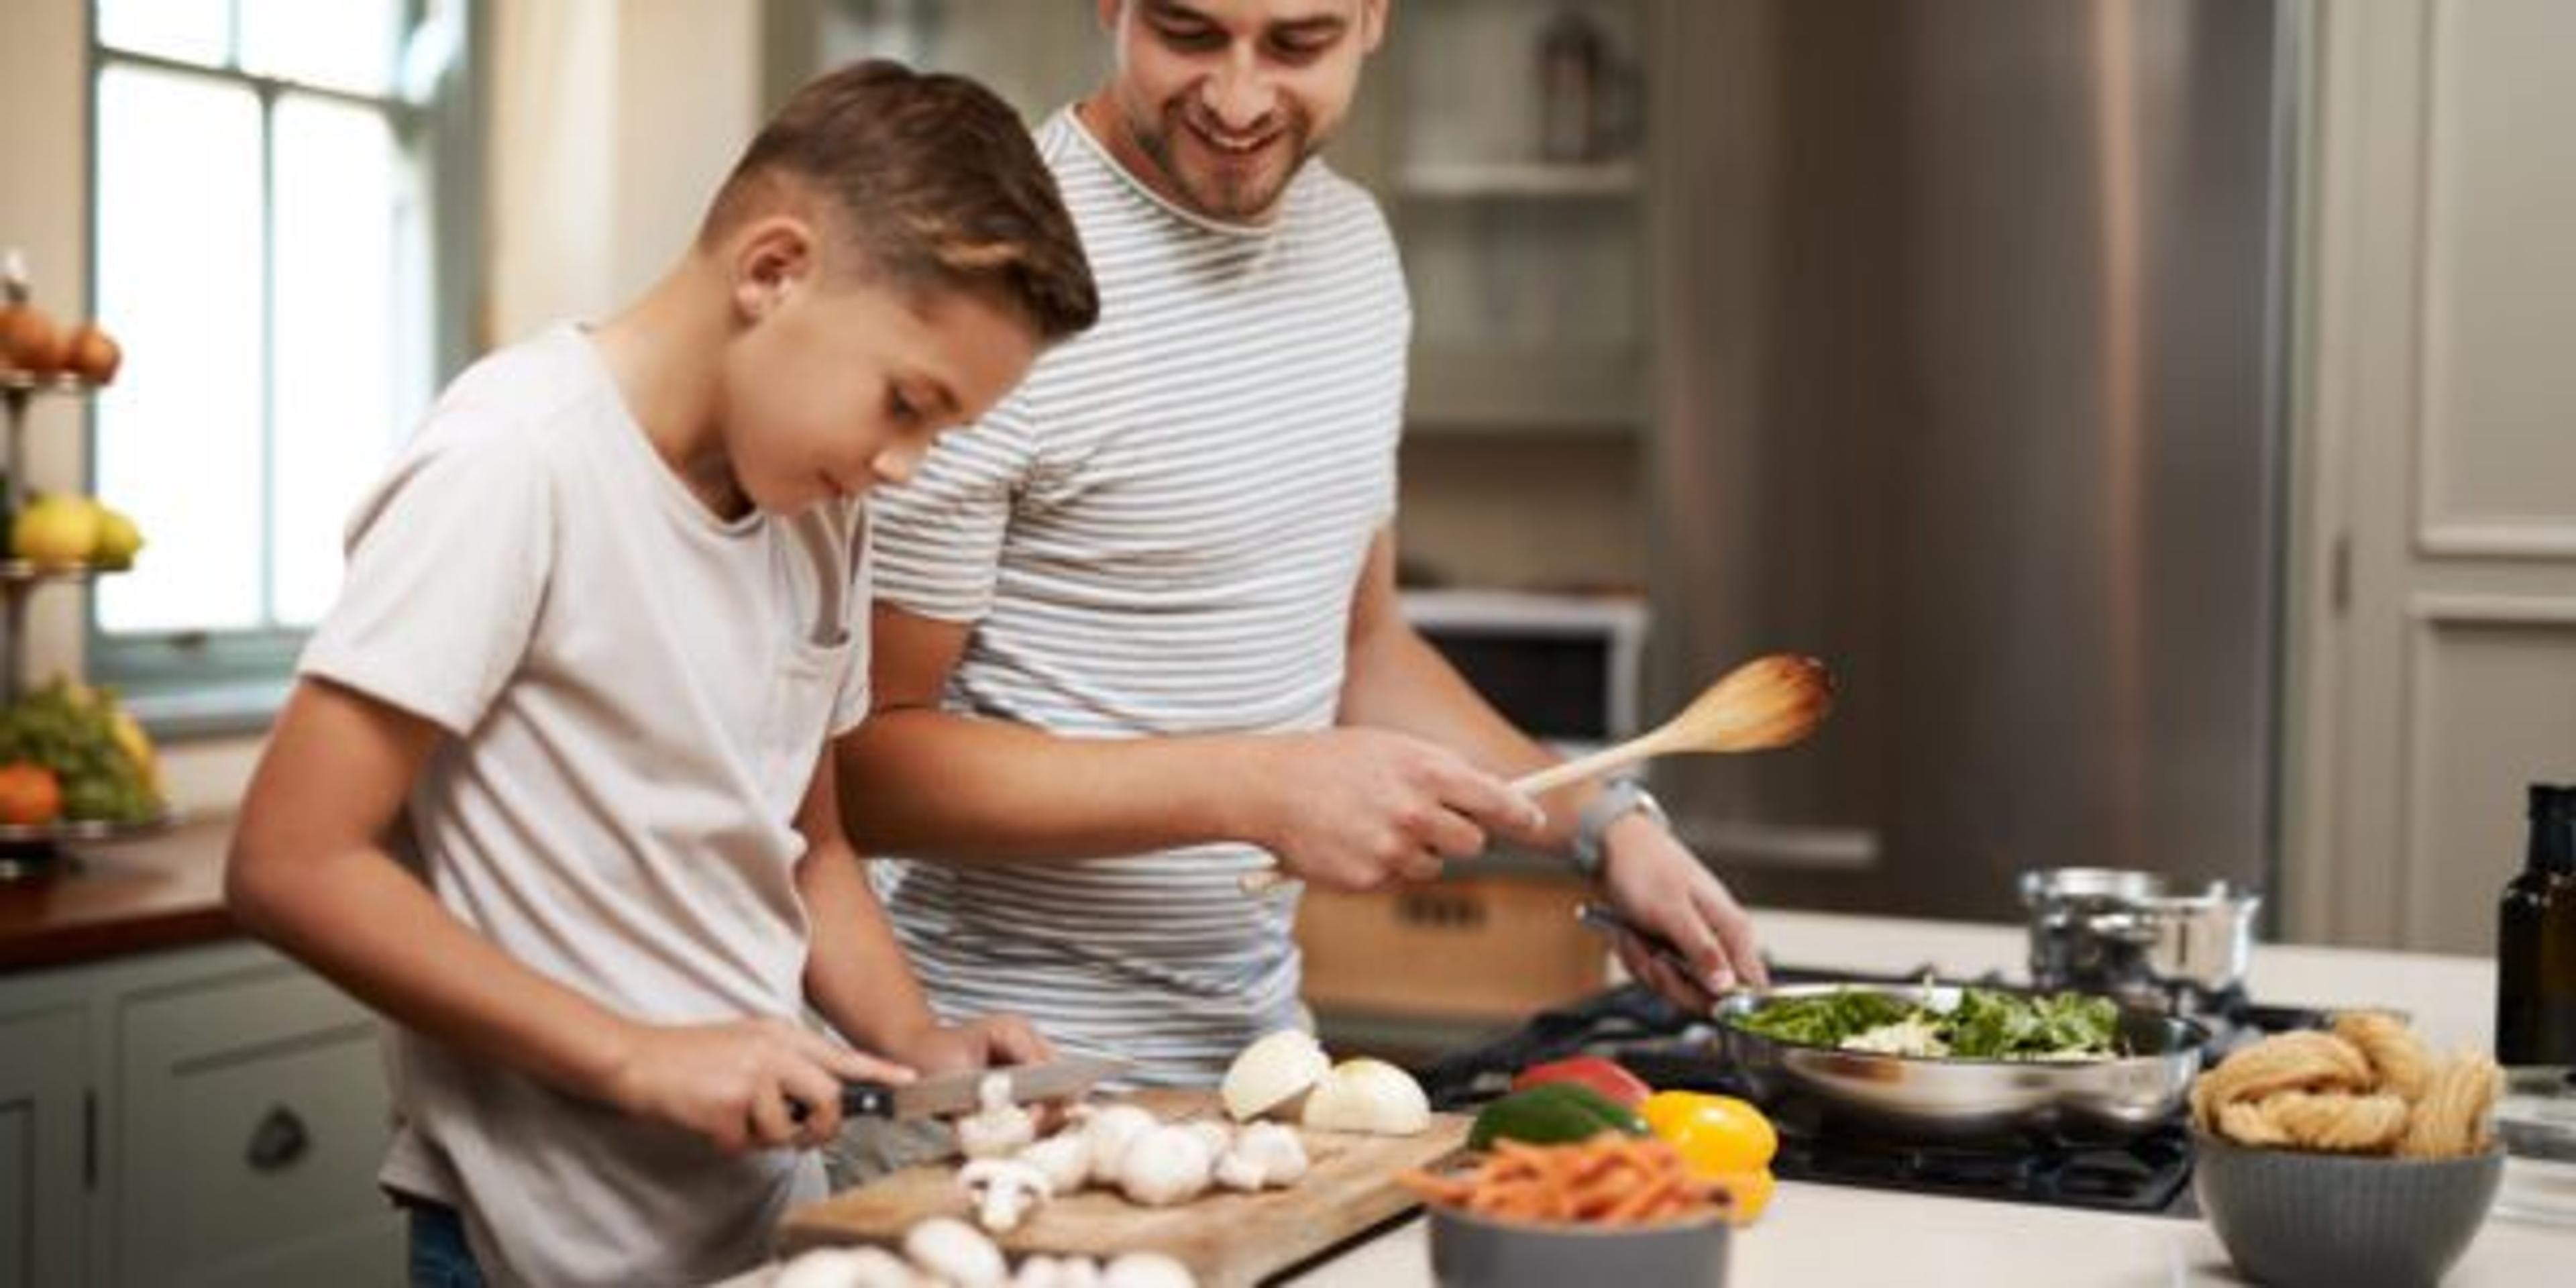 Cropped shot of a young boy helping his father cook in the kitchen